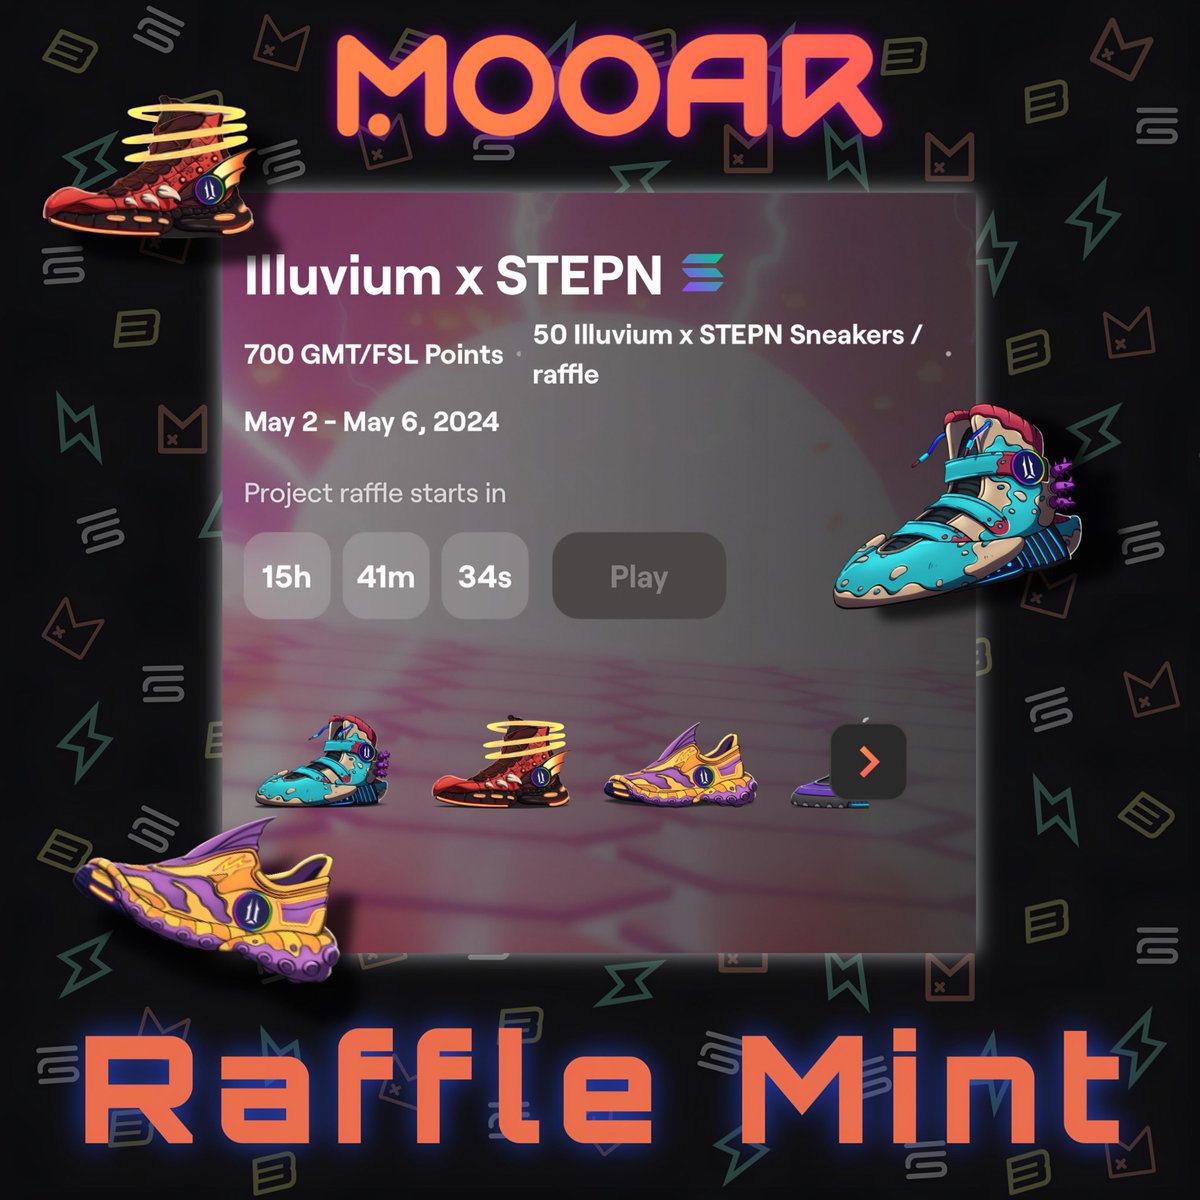 🤝 Illuvium x STEPN 
Raffle Mint on #MOOAR … SOON

mooar.com/rafflemint/ill…

🚀 199 OGs & 1 Genesis co-branded Sneakers will be available for raffle.

🗓️ May 2 - May 6, 2024
🚪 700 GMT/FSL Point per ticket 

🆙 Holders of the following NFT collections enjoy at least 50% higher…